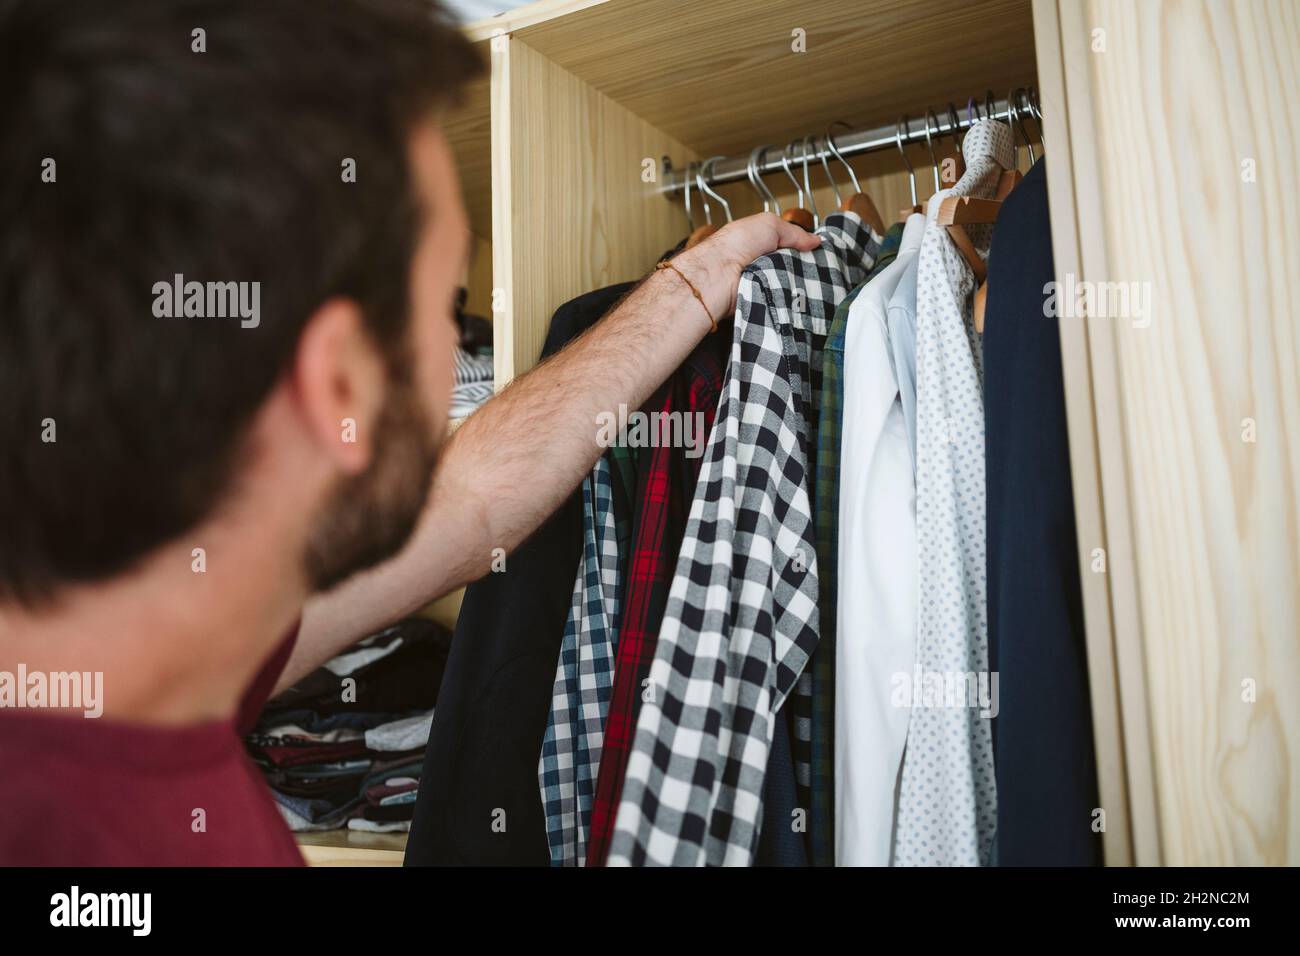 Man removing clothes from closet at home Stock Photo